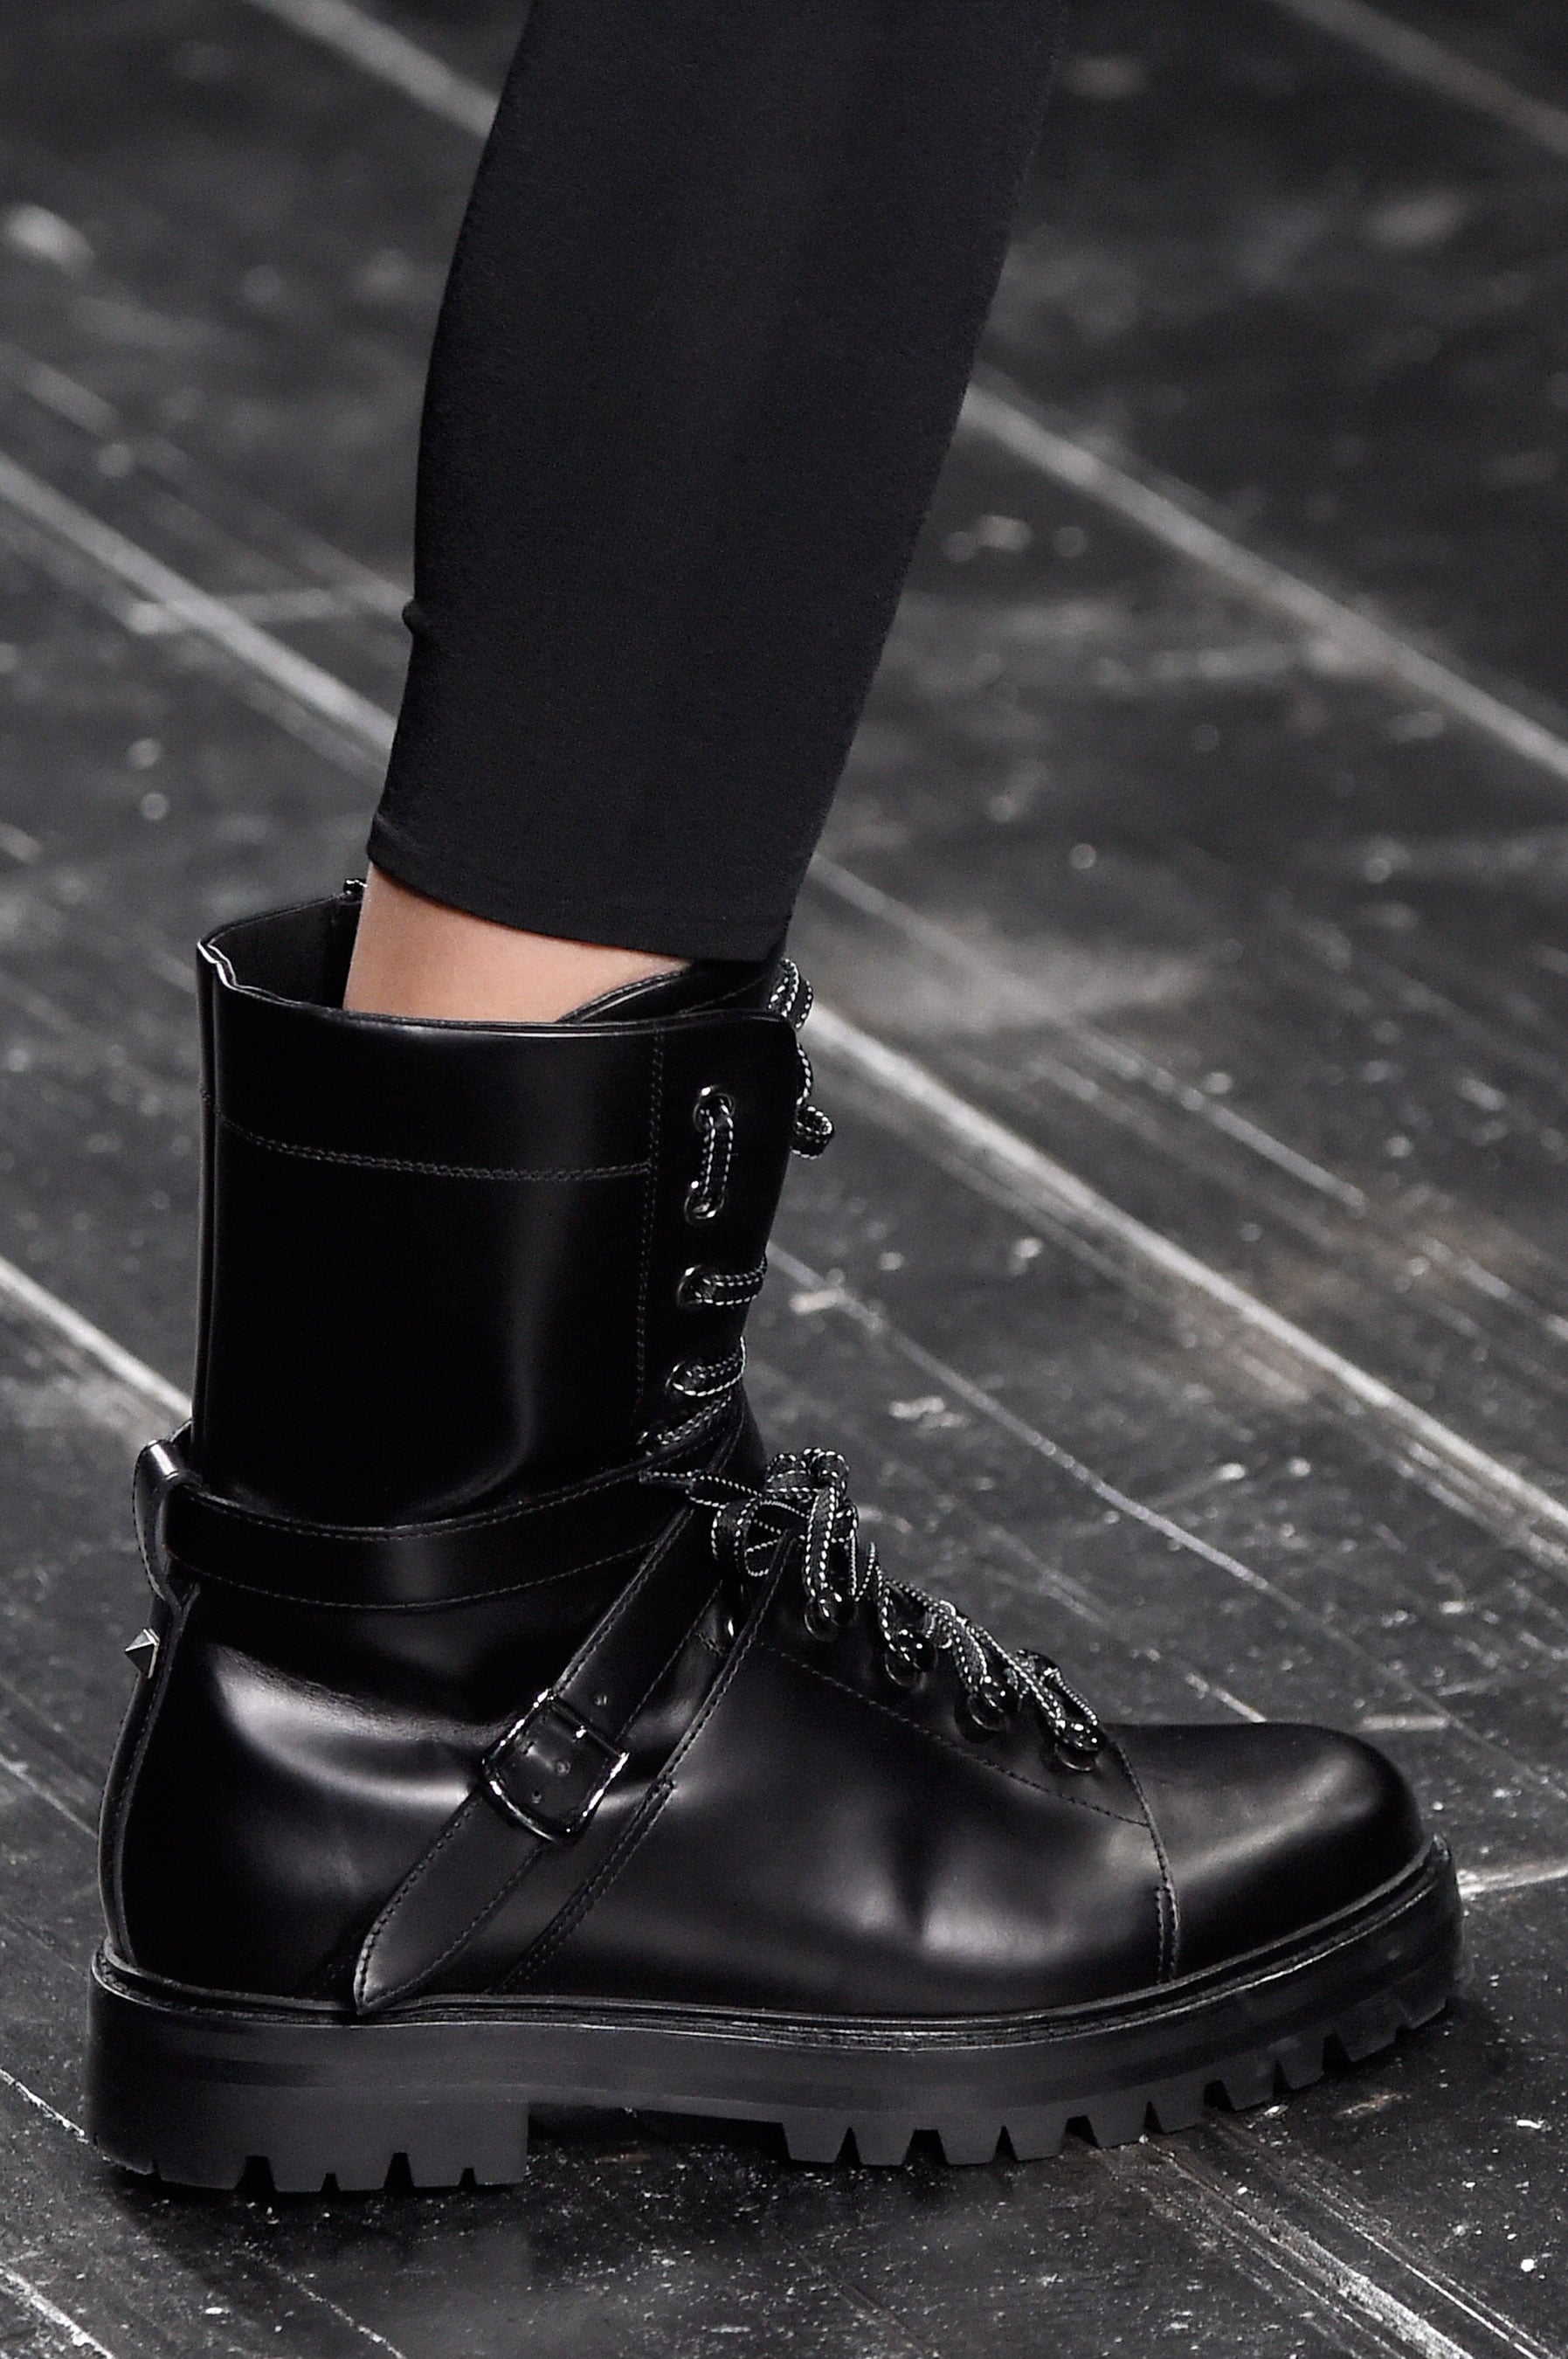 Valentino Fall 2016 | Check Out the Latest Designer Shoes That Just Walked the Runway at PFW POPSUGAR Fashion Photo 6